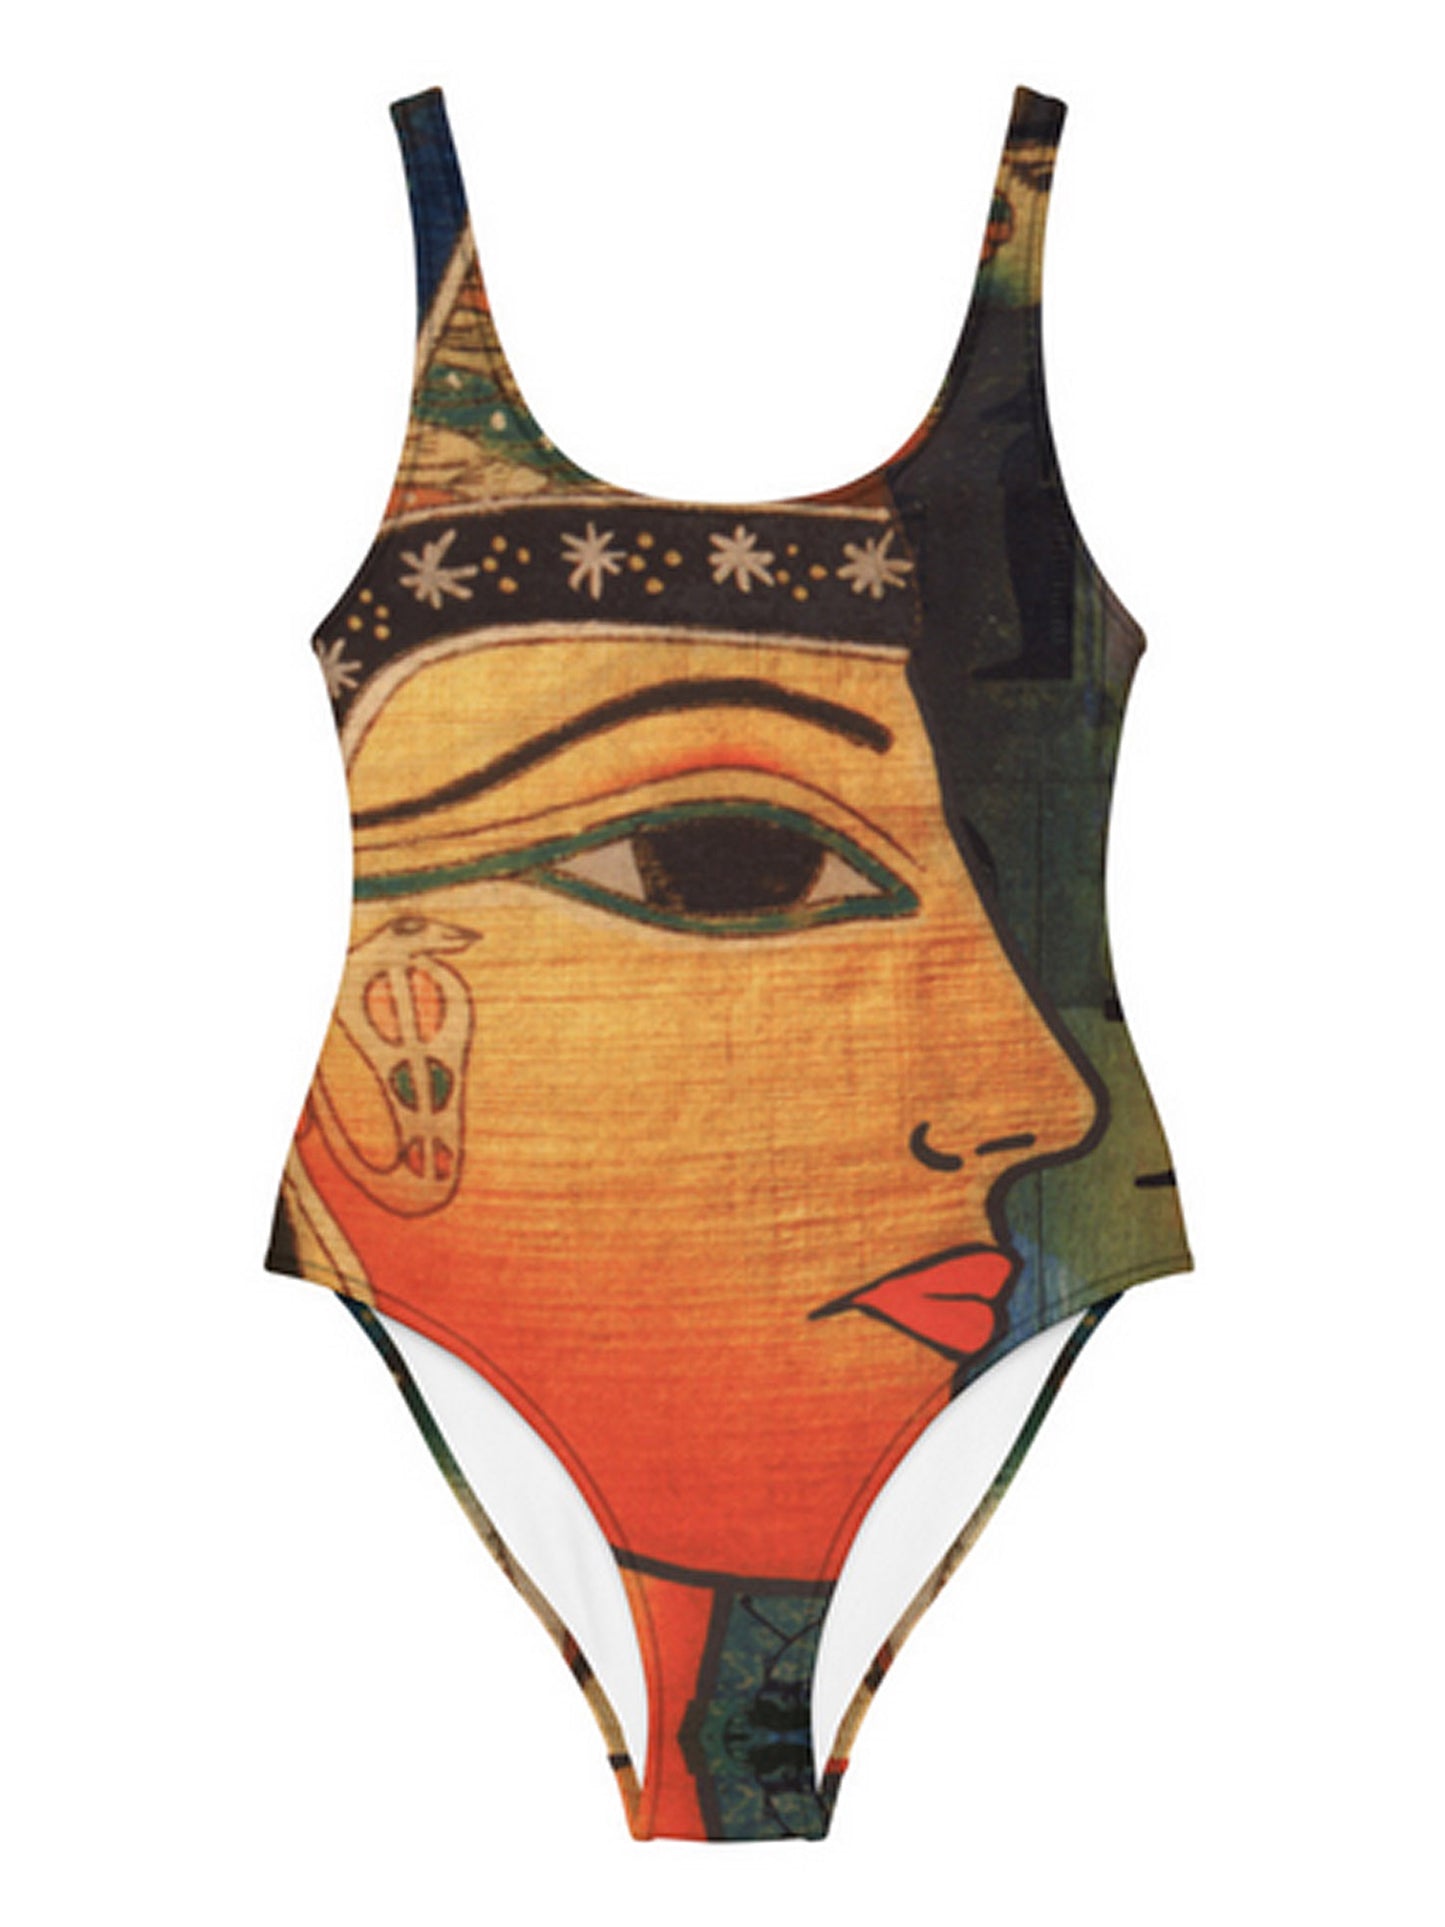 Sfinx Ma'at One-Piece Swimsuit